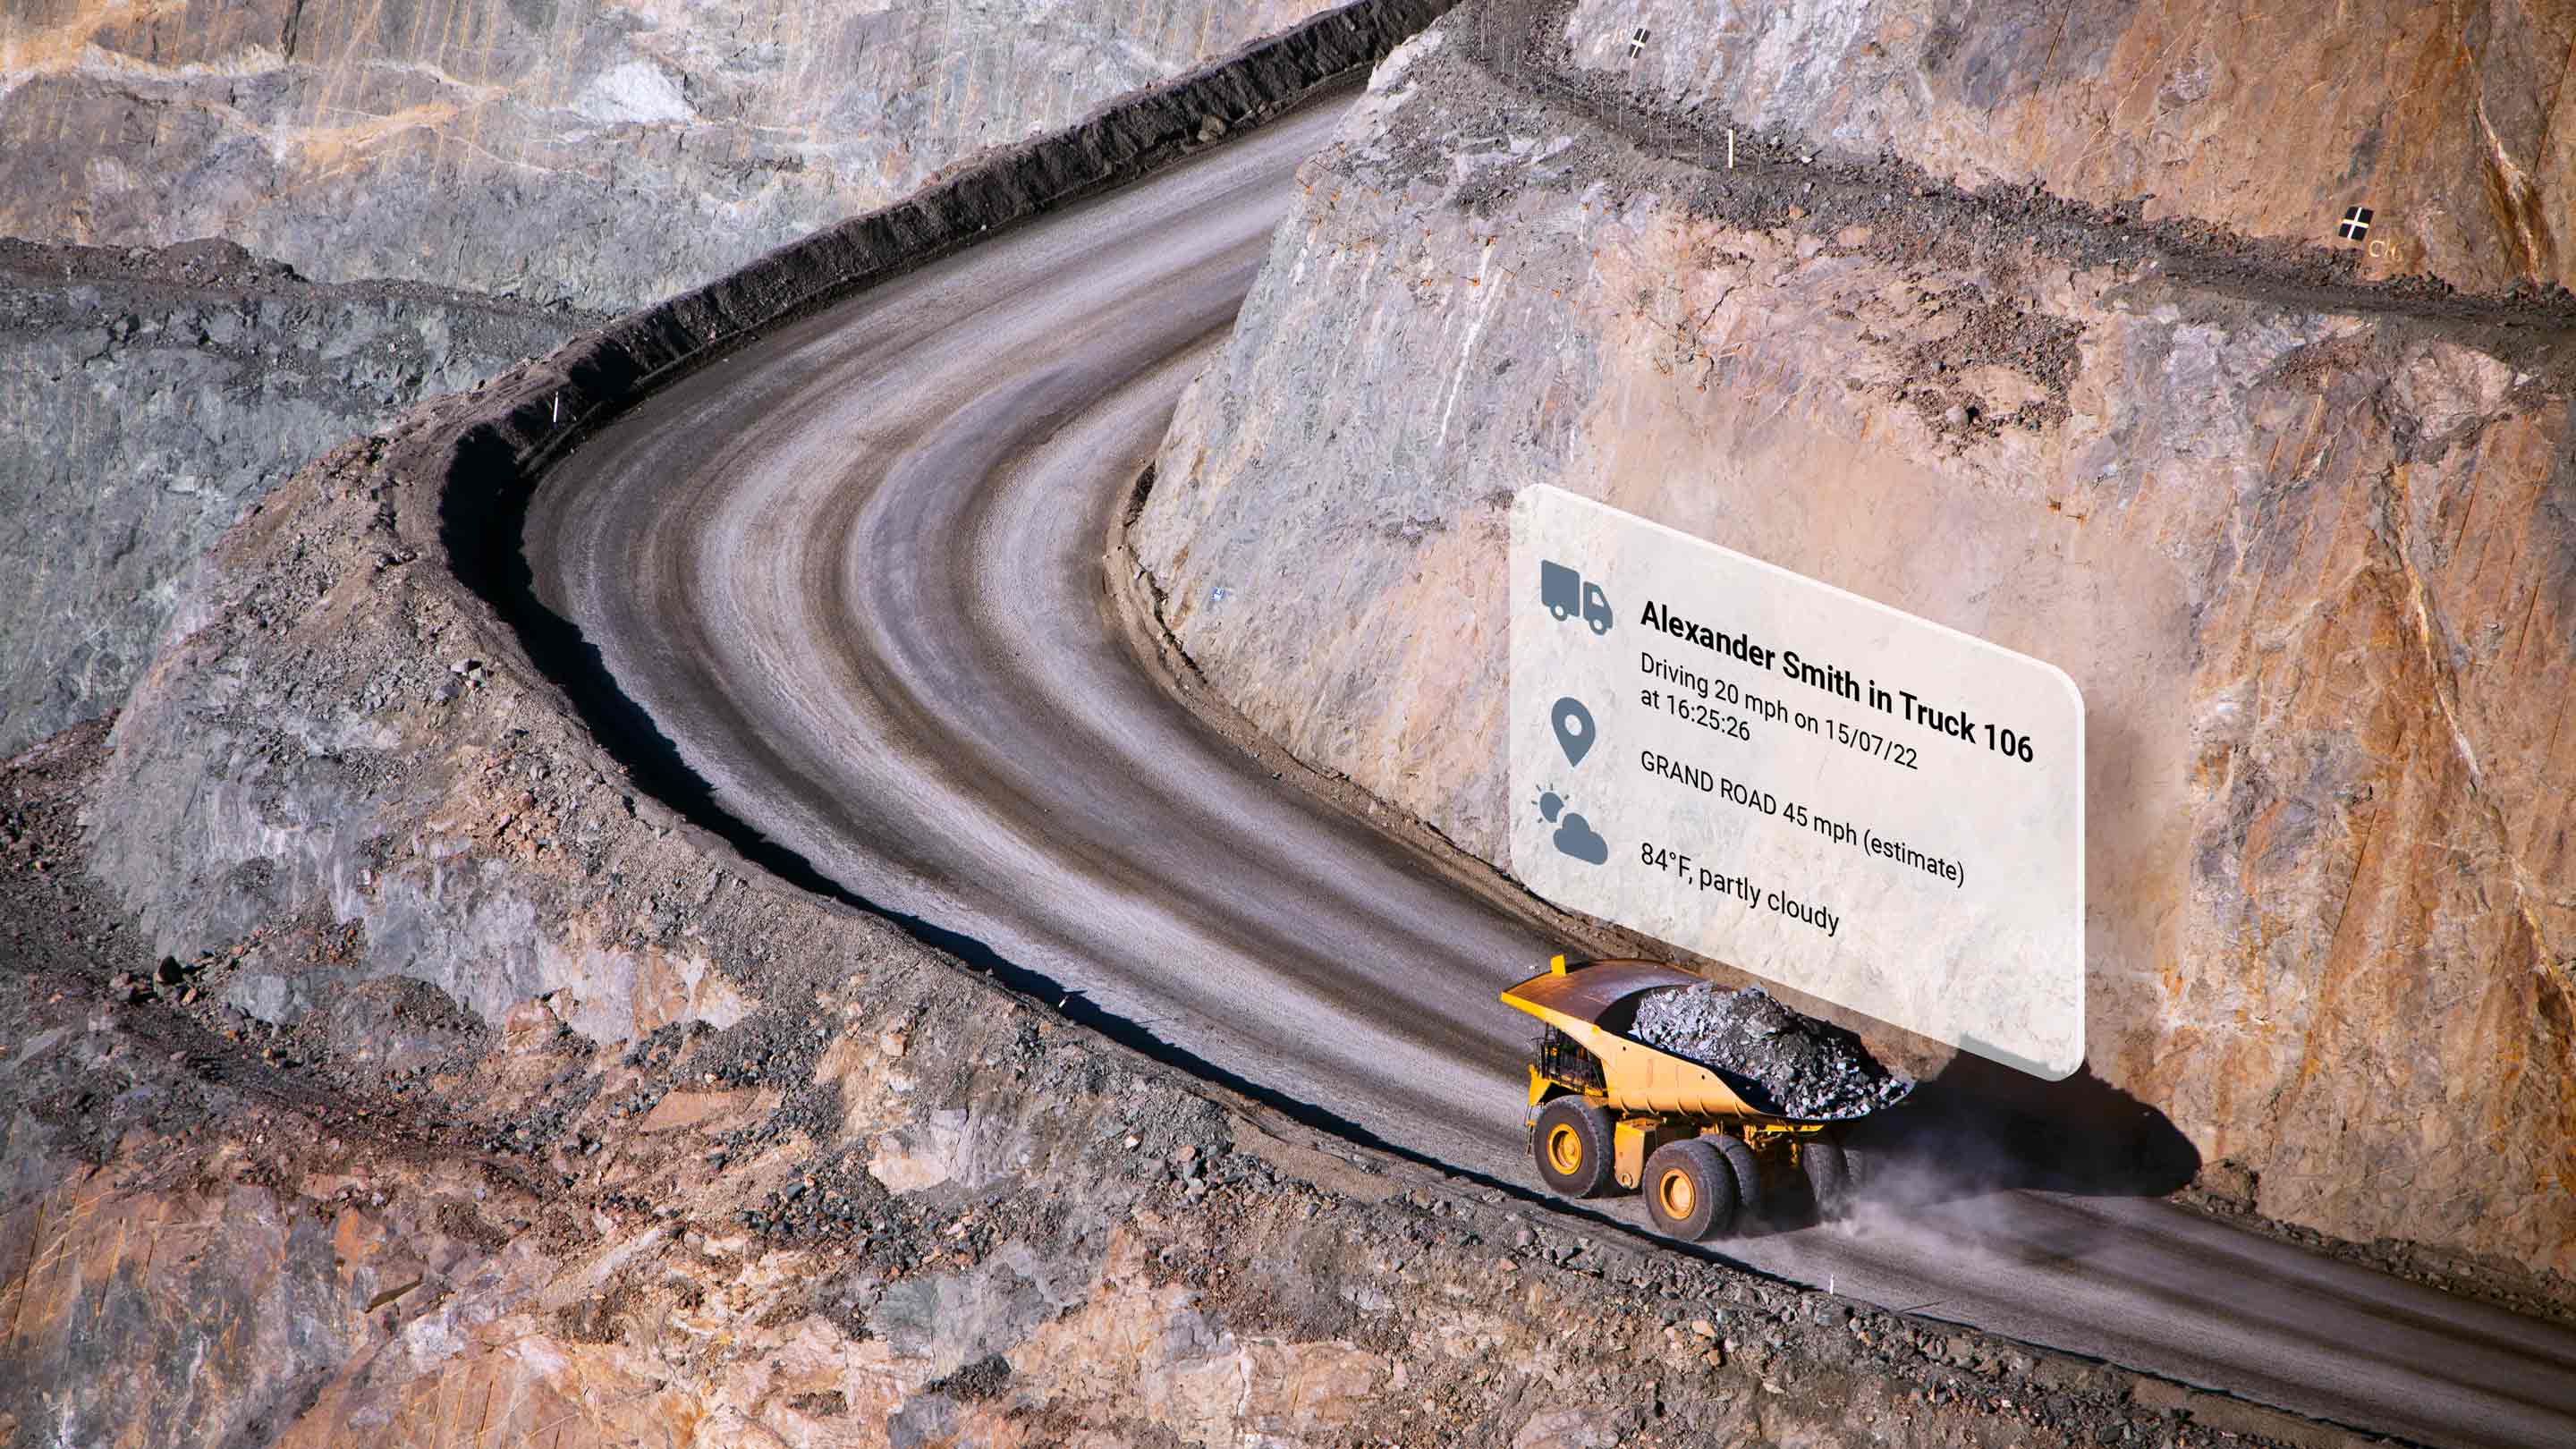 Yellow dump truck driving up a curving dirt road with MyGeotab UI elements above it